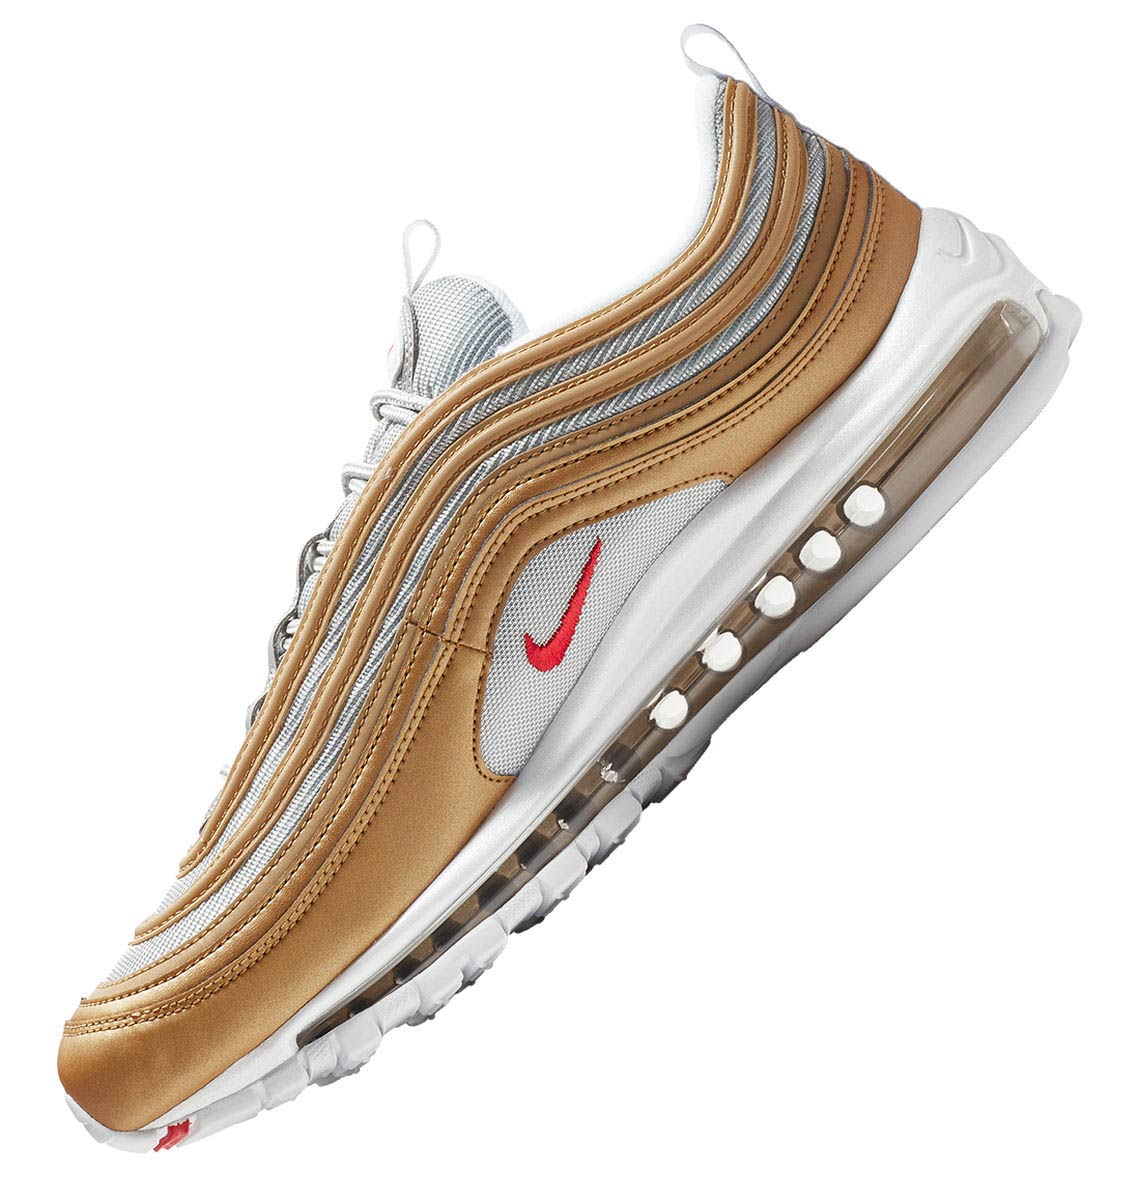 nike air max gold and red